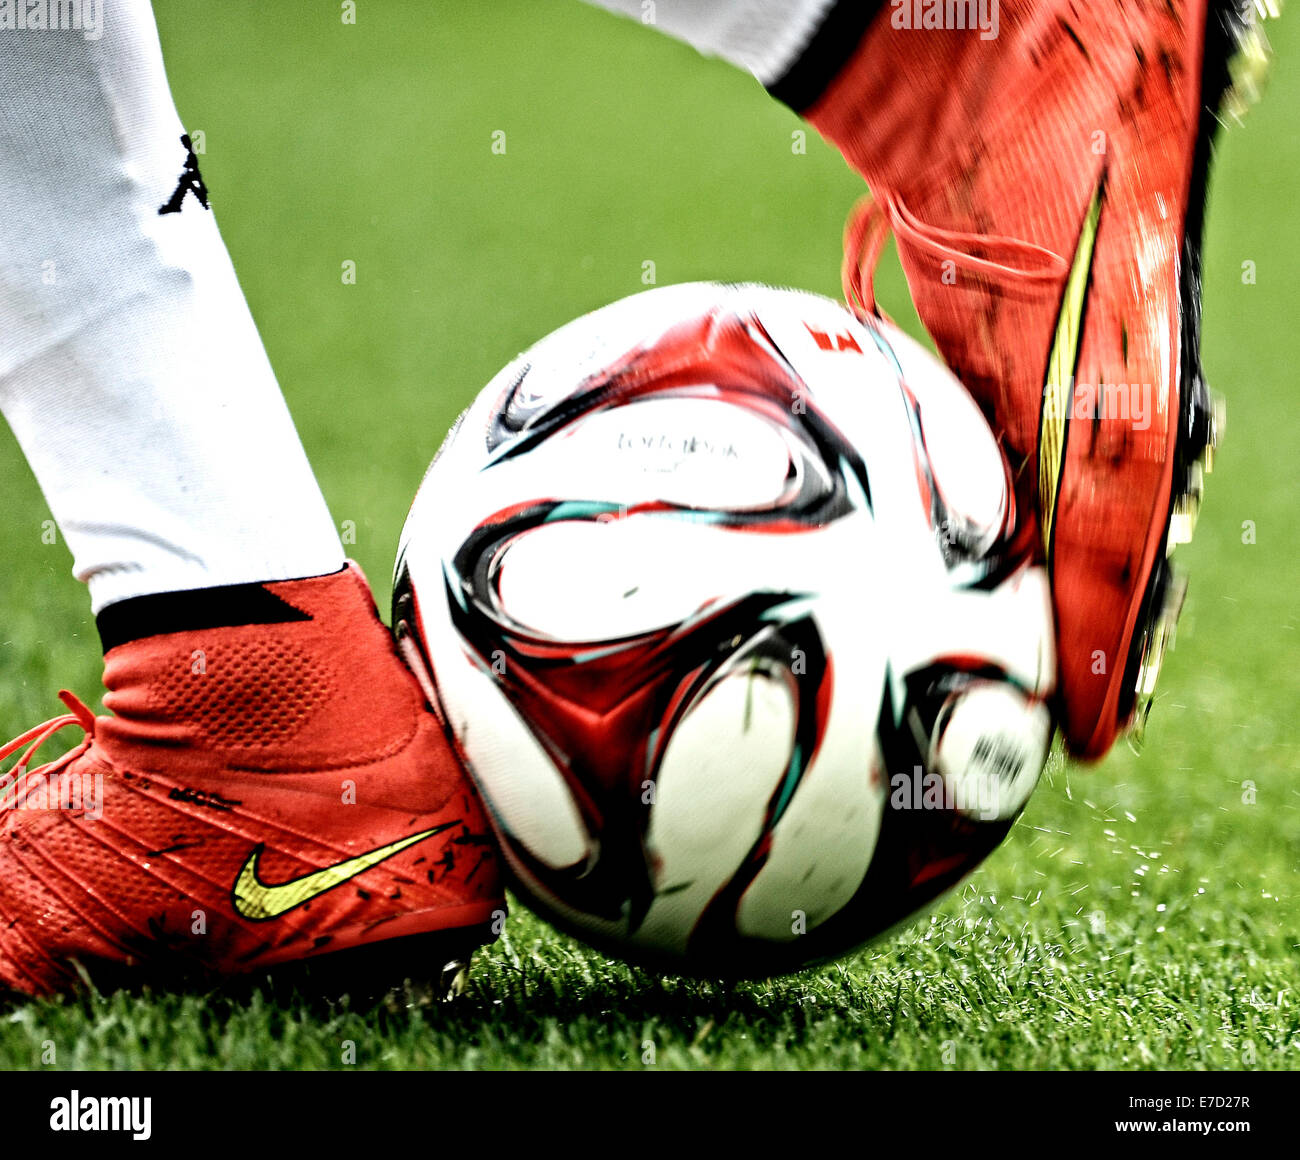 Page 2 - Nike Football Boots High Resolution Stock Photography and Images -  Alamy